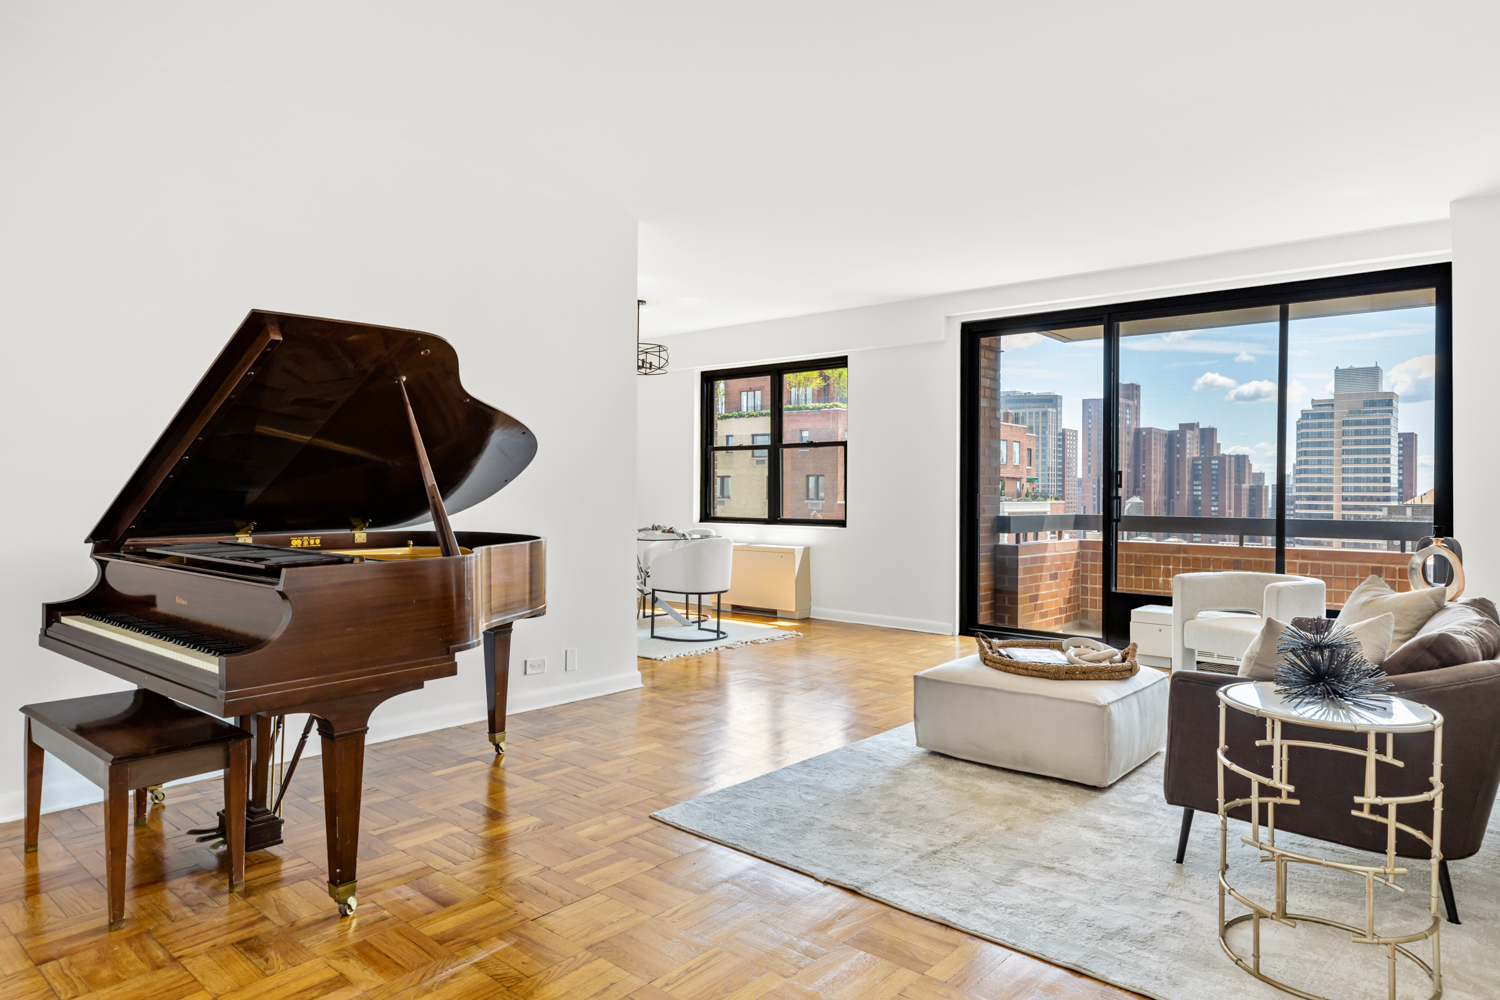 45 East 89th Street 21 F, Carnegie Hill, Upper East Side, NYC - 3 Bedrooms  
3 Bathrooms  
6 Rooms - 